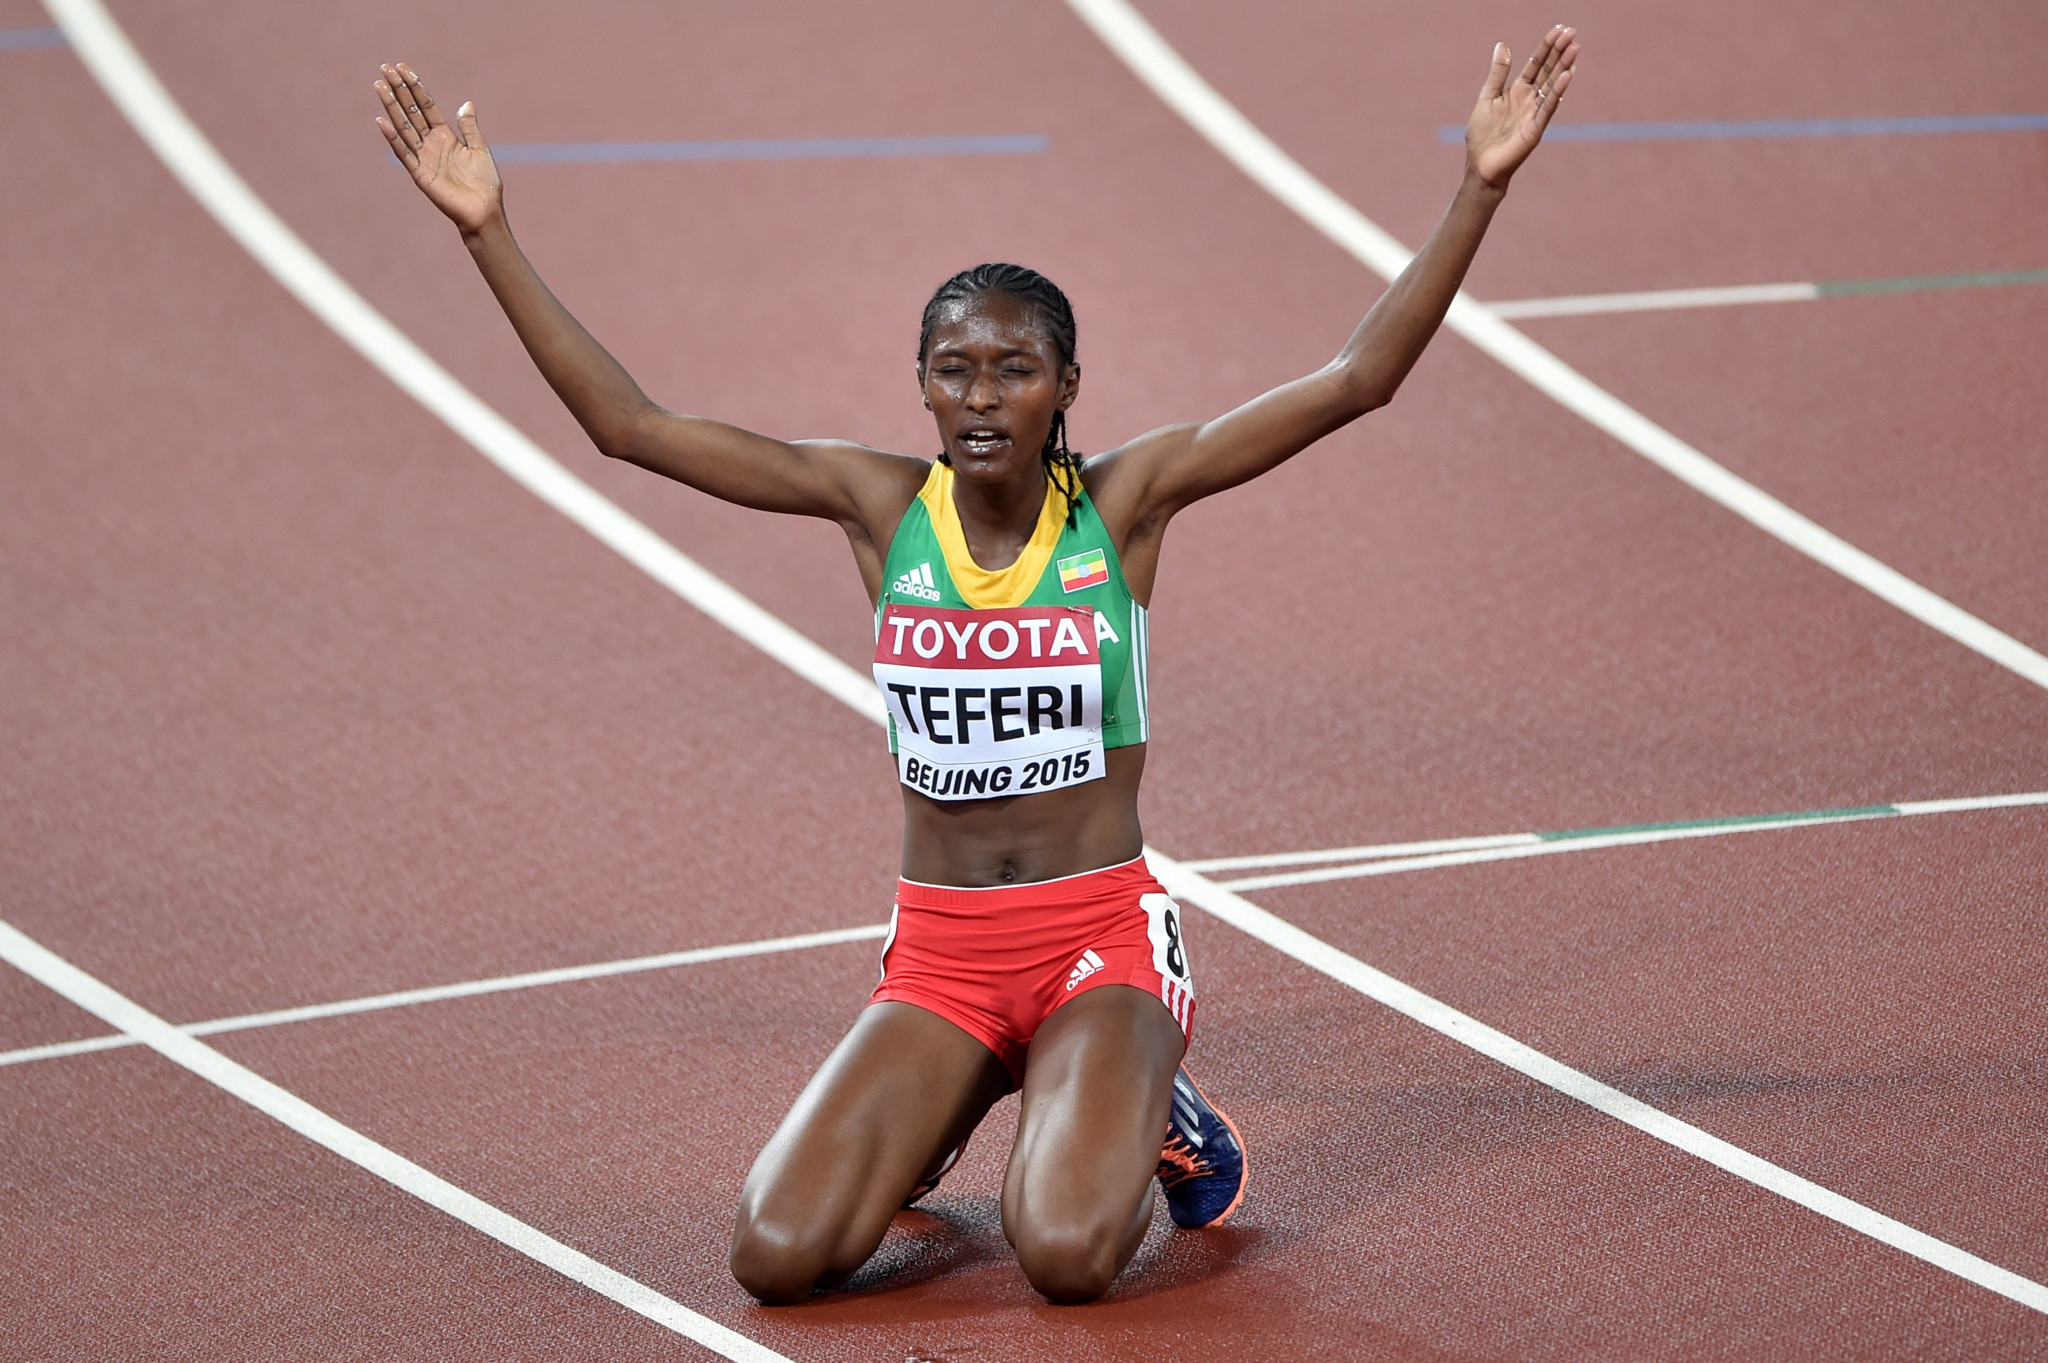 Senbere Teferi will look for a third women's title ©Getty Images